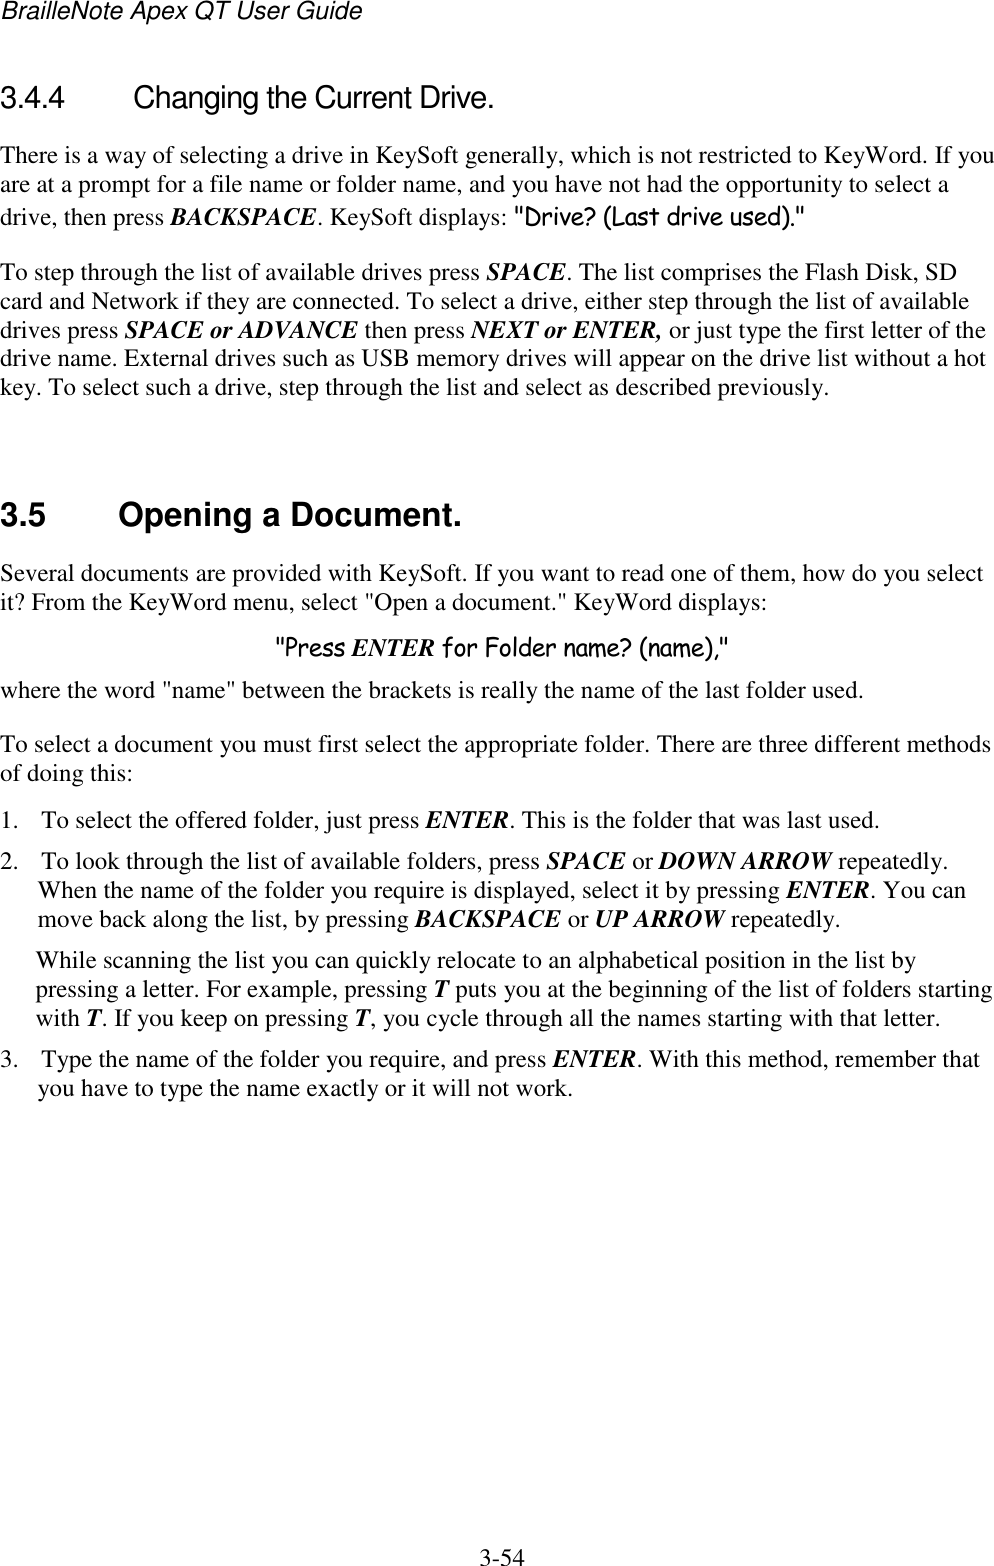 BrailleNote Apex QT User Guide  3-54   3.4.4  Changing the Current Drive. There is a way of selecting a drive in KeySoft generally, which is not restricted to KeyWord. If you are at a prompt for a file name or folder name, and you have not had the opportunity to select a drive, then press BACKSPACE. KeySoft displays: &quot;Drive? (Last drive used).&quot; To step through the list of available drives press SPACE. The list comprises the Flash Disk, SD card and Network if they are connected. To select a drive, either step through the list of available drives press SPACE or ADVANCE then press NEXT or ENTER, or just type the first letter of the drive name. External drives such as USB memory drives will appear on the drive list without a hot key. To select such a drive, step through the list and select as described previously.   3.5  Opening a Document. Several documents are provided with KeySoft. If you want to read one of them, how do you select it? From the KeyWord menu, select &quot;Open a document.&quot; KeyWord displays: &quot;Press ENTER for Folder name? (name),&quot; where the word &quot;name&quot; between the brackets is really the name of the last folder used.  To select a document you must first select the appropriate folder. There are three different methods of doing this: 1. To select the offered folder, just press ENTER. This is the folder that was last used.  2. To look through the list of available folders, press SPACE or DOWN ARROW repeatedly. When the name of the folder you require is displayed, select it by pressing ENTER. You can move back along the list, by pressing BACKSPACE or UP ARROW repeatedly.  While scanning the list you can quickly relocate to an alphabetical position in the list by pressing a letter. For example, pressing T puts you at the beginning of the list of folders starting with T. If you keep on pressing T, you cycle through all the names starting with that letter.  3. Type the name of the folder you require, and press ENTER. With this method, remember that you have to type the name exactly or it will not work.  